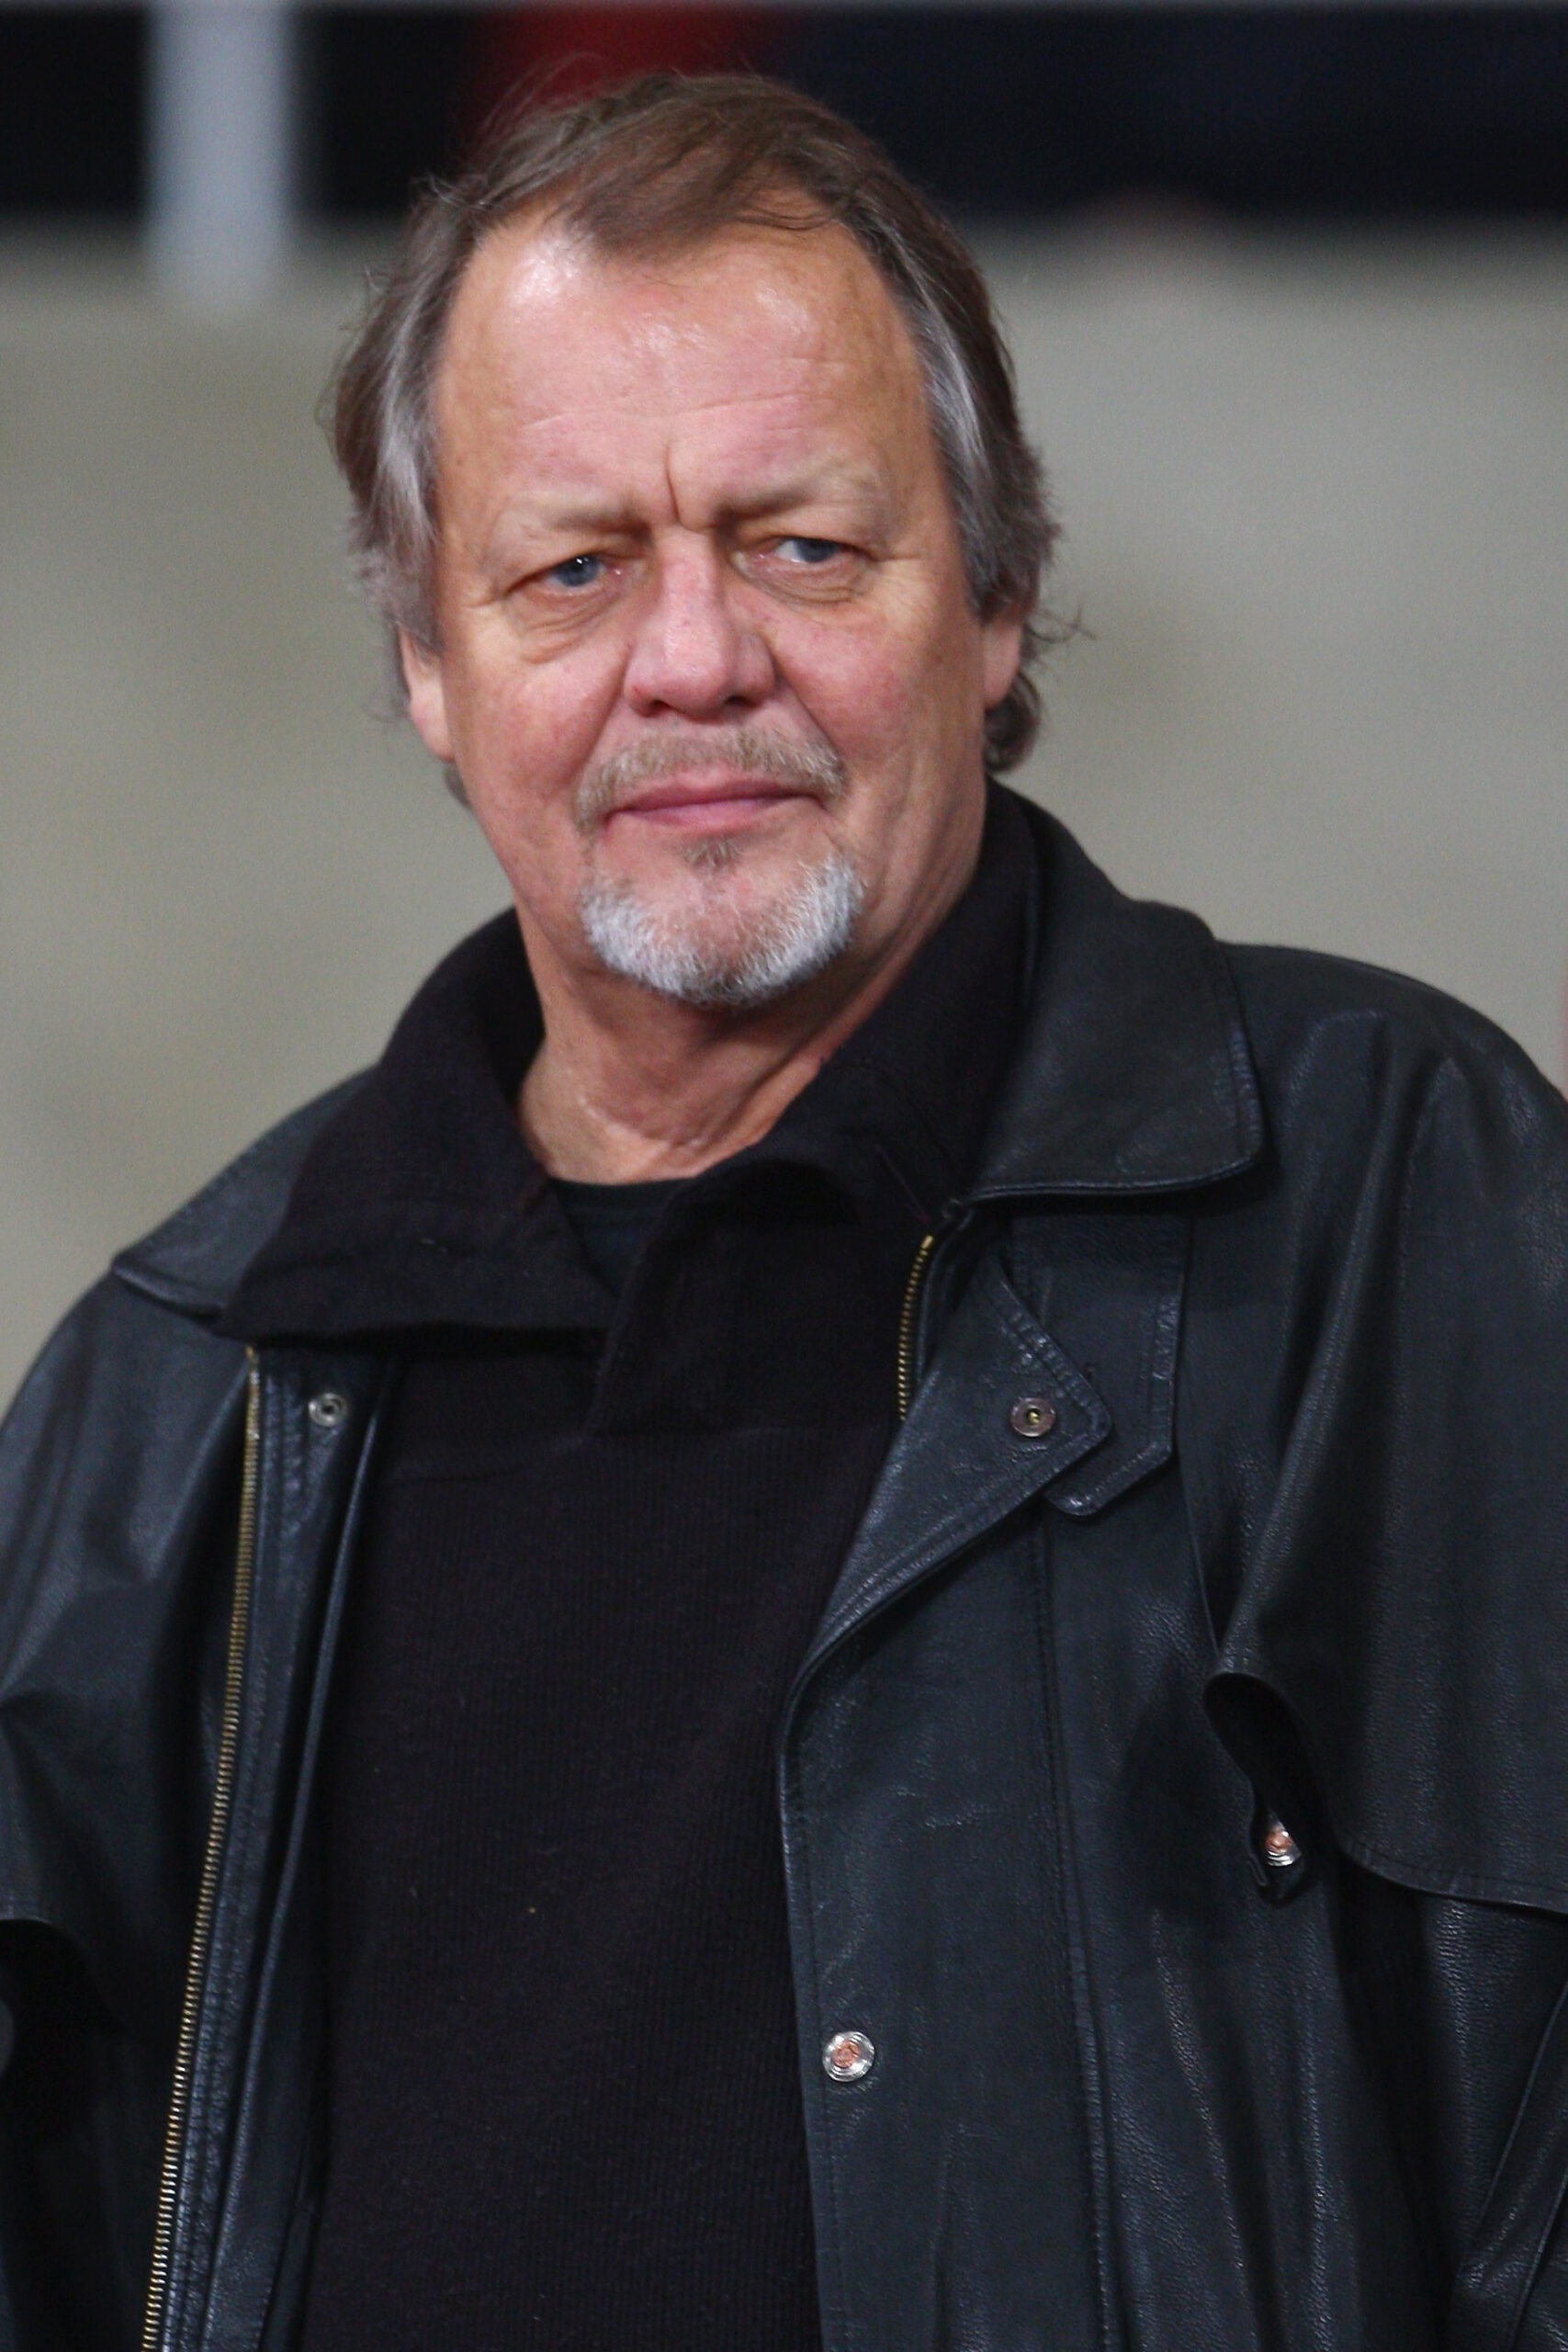 David Soul at the Emirates Stadium on November 5, 2008 in London, England | Source: Getty Images